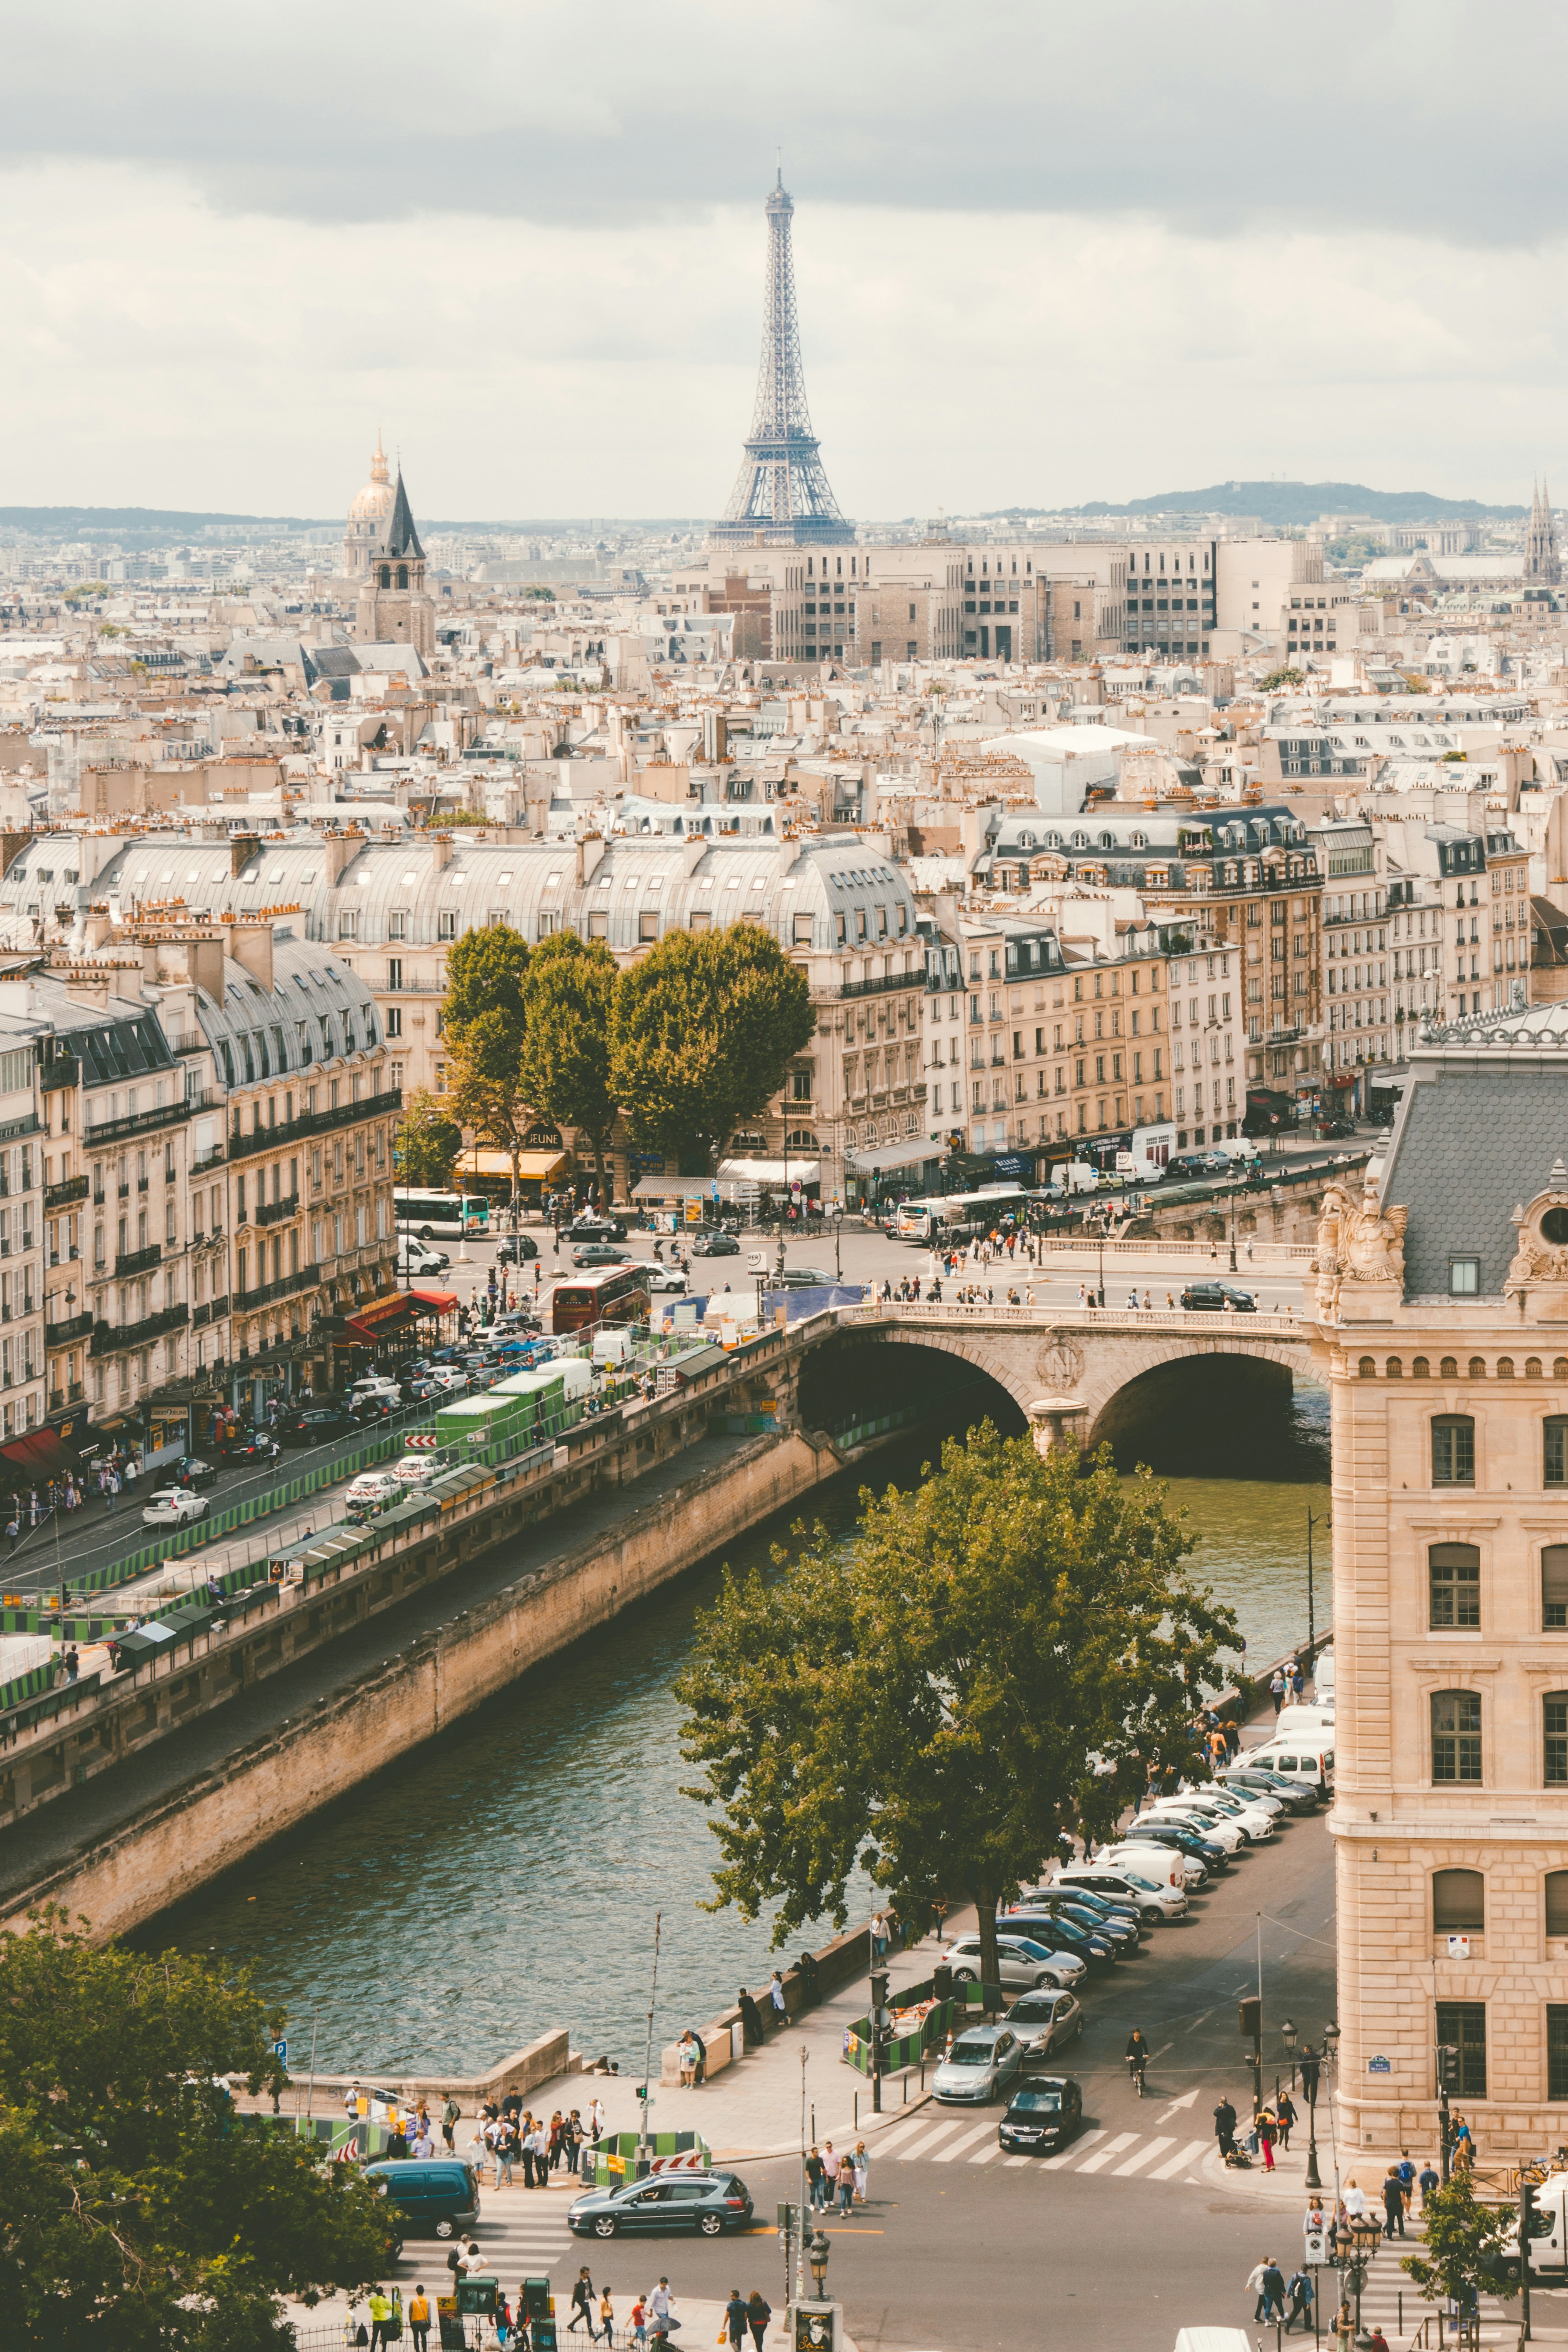 Choose from a curated selection of Paris photos. Always free on Unsplash.